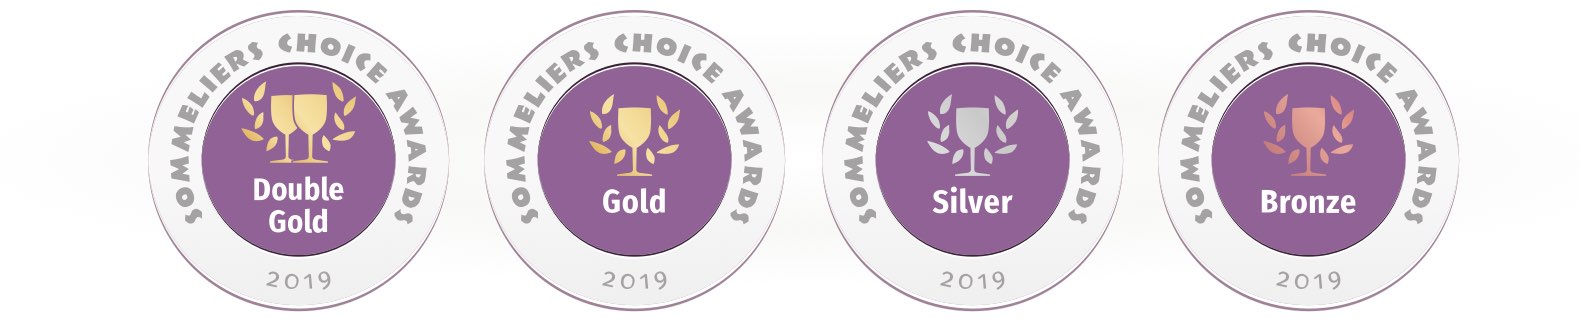 Sommeliers Choice Awards medals